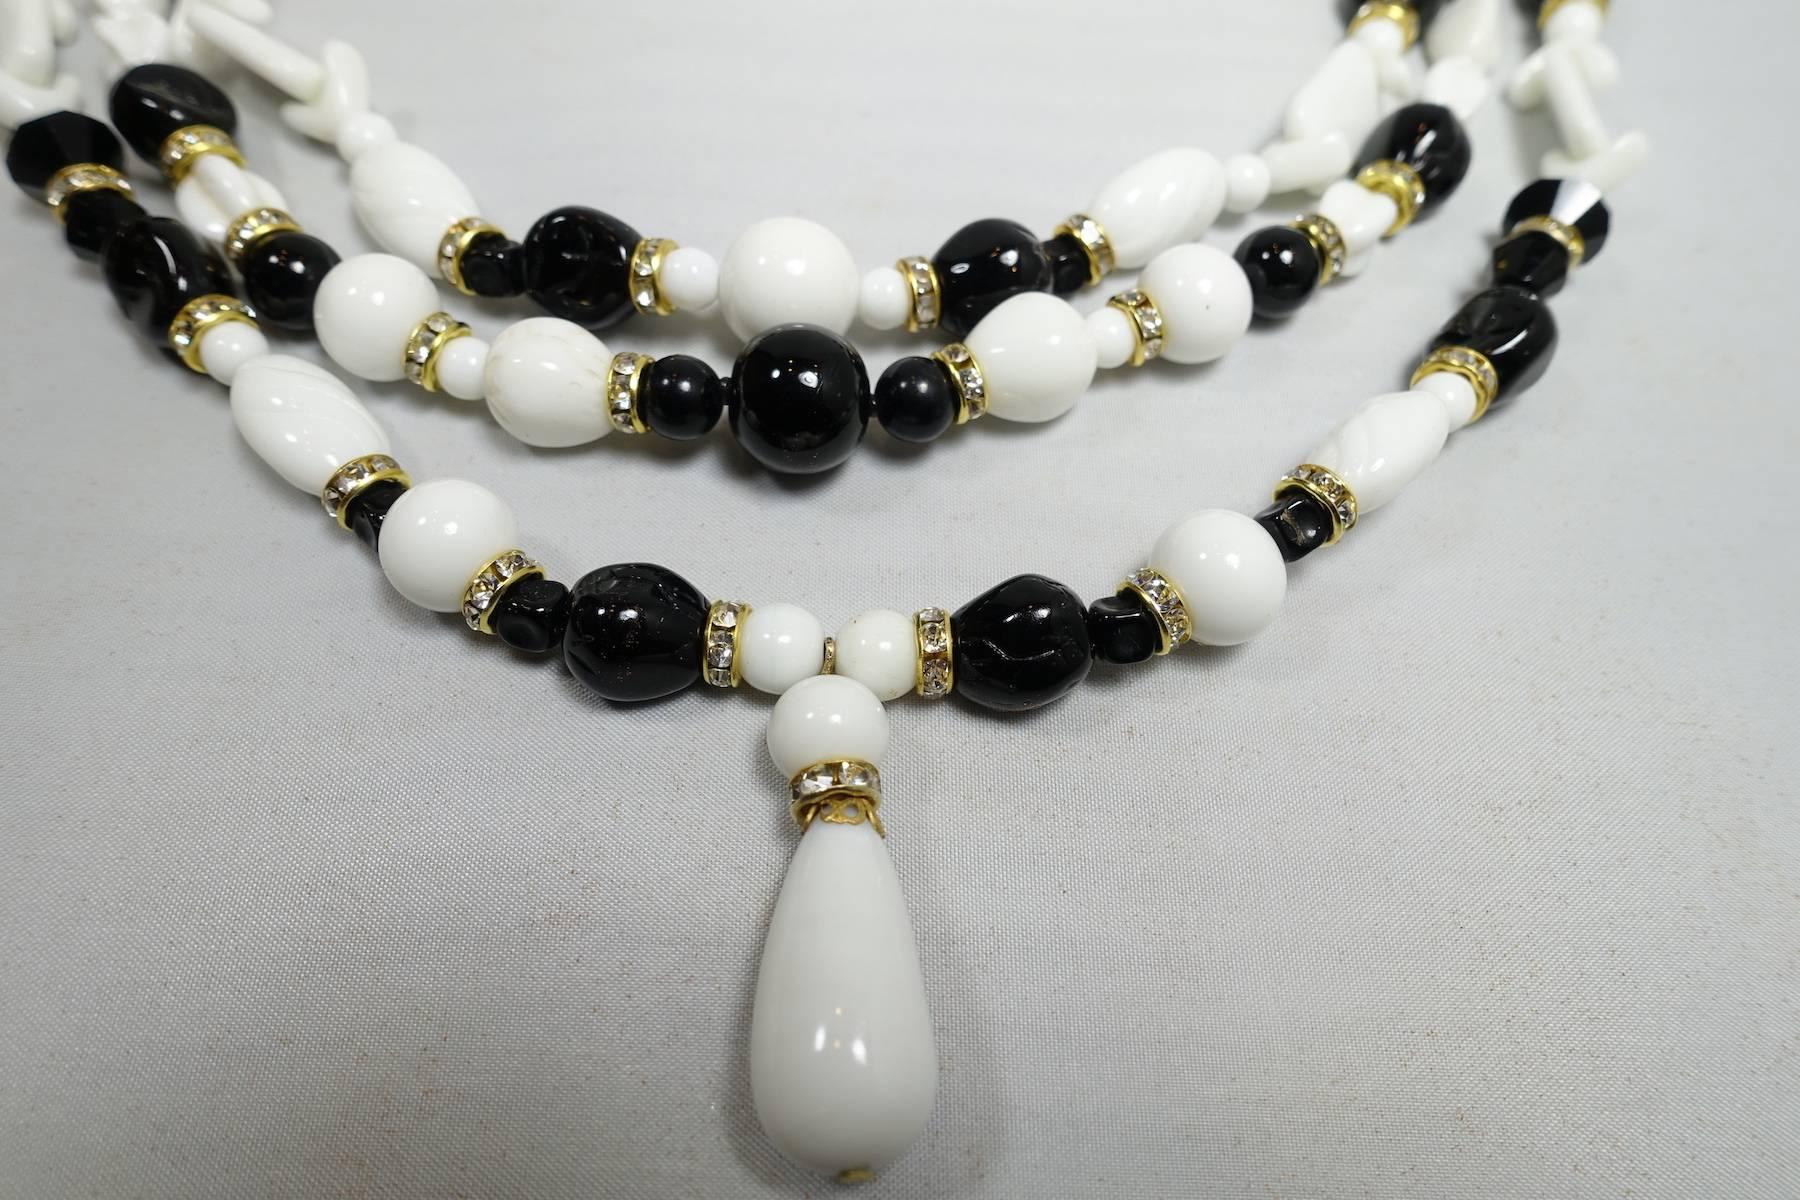 Women's Miriam Haskell Vintage 3 Row White and Black Beaded Necklace